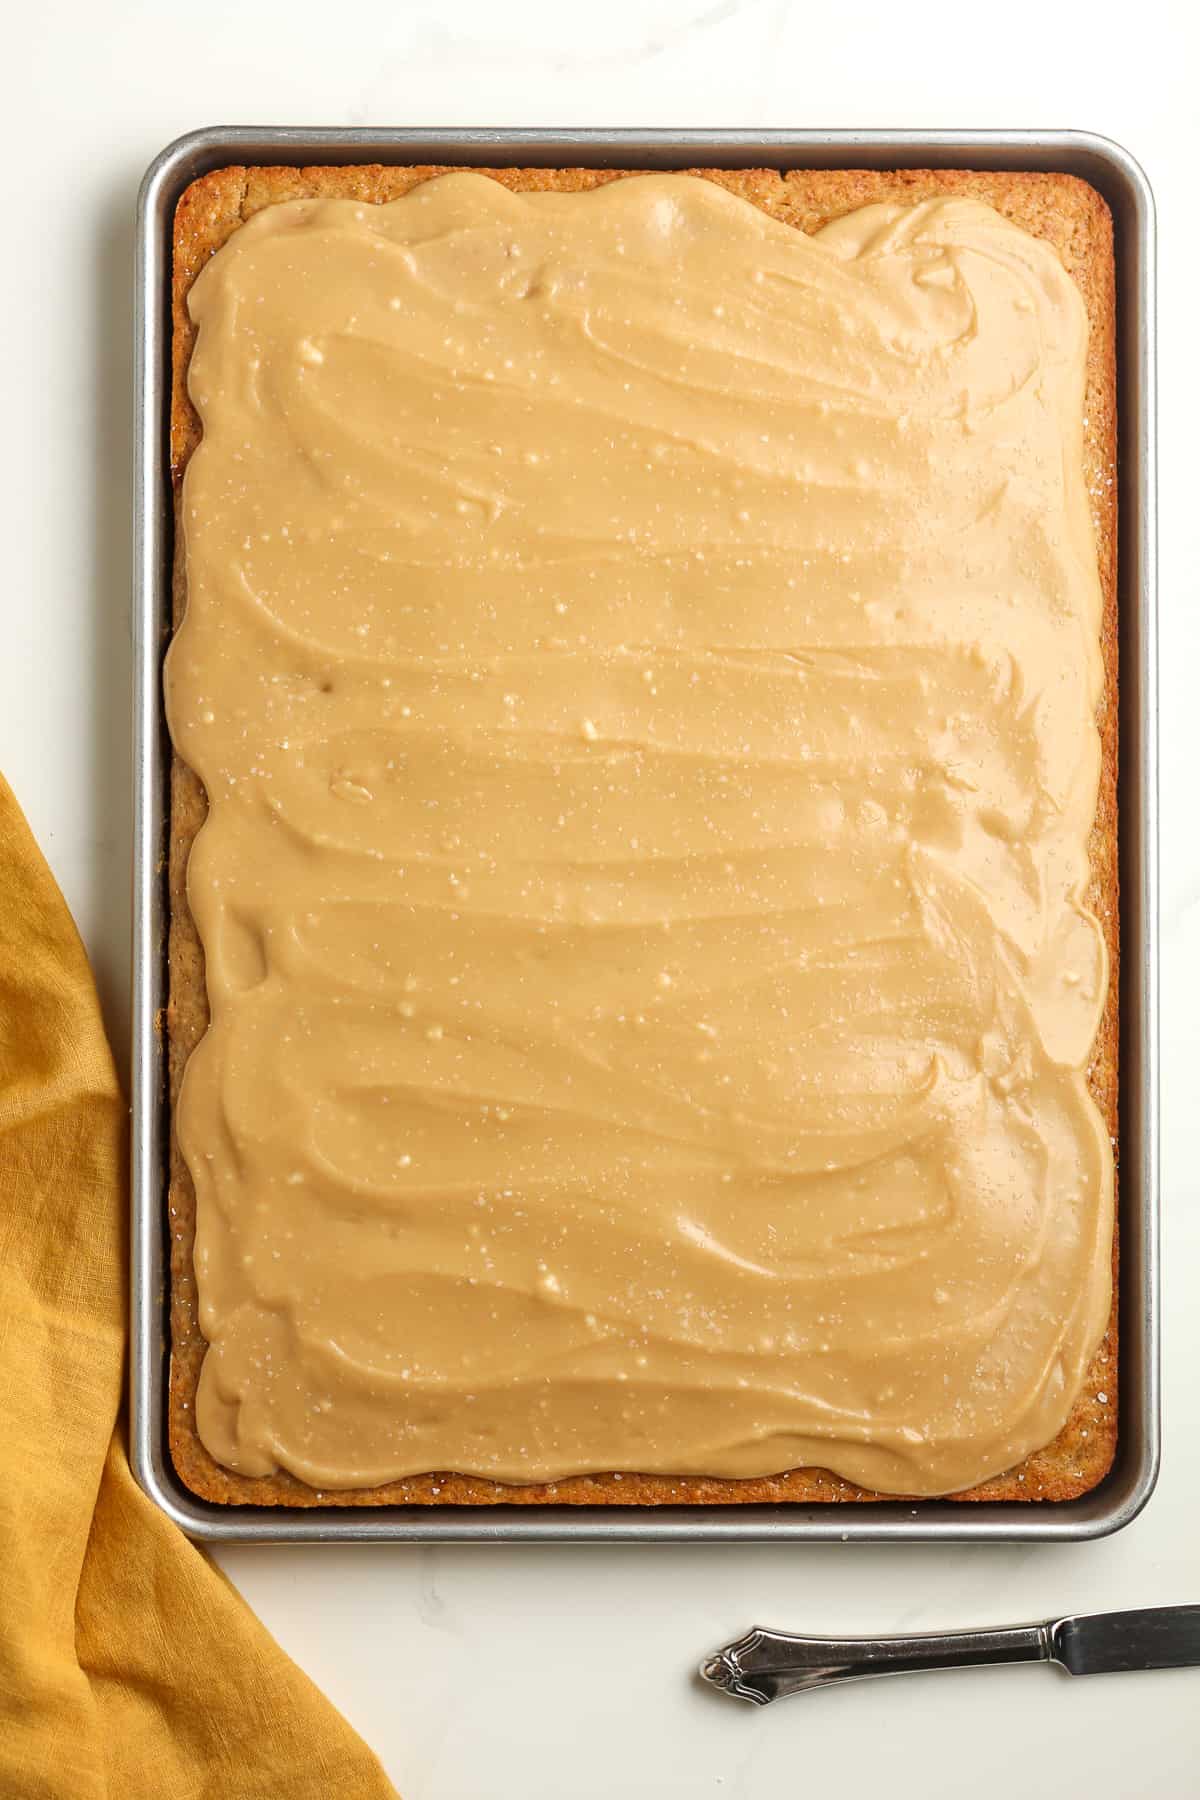 A sheet pan of the finished banana cake with caramel frosting.